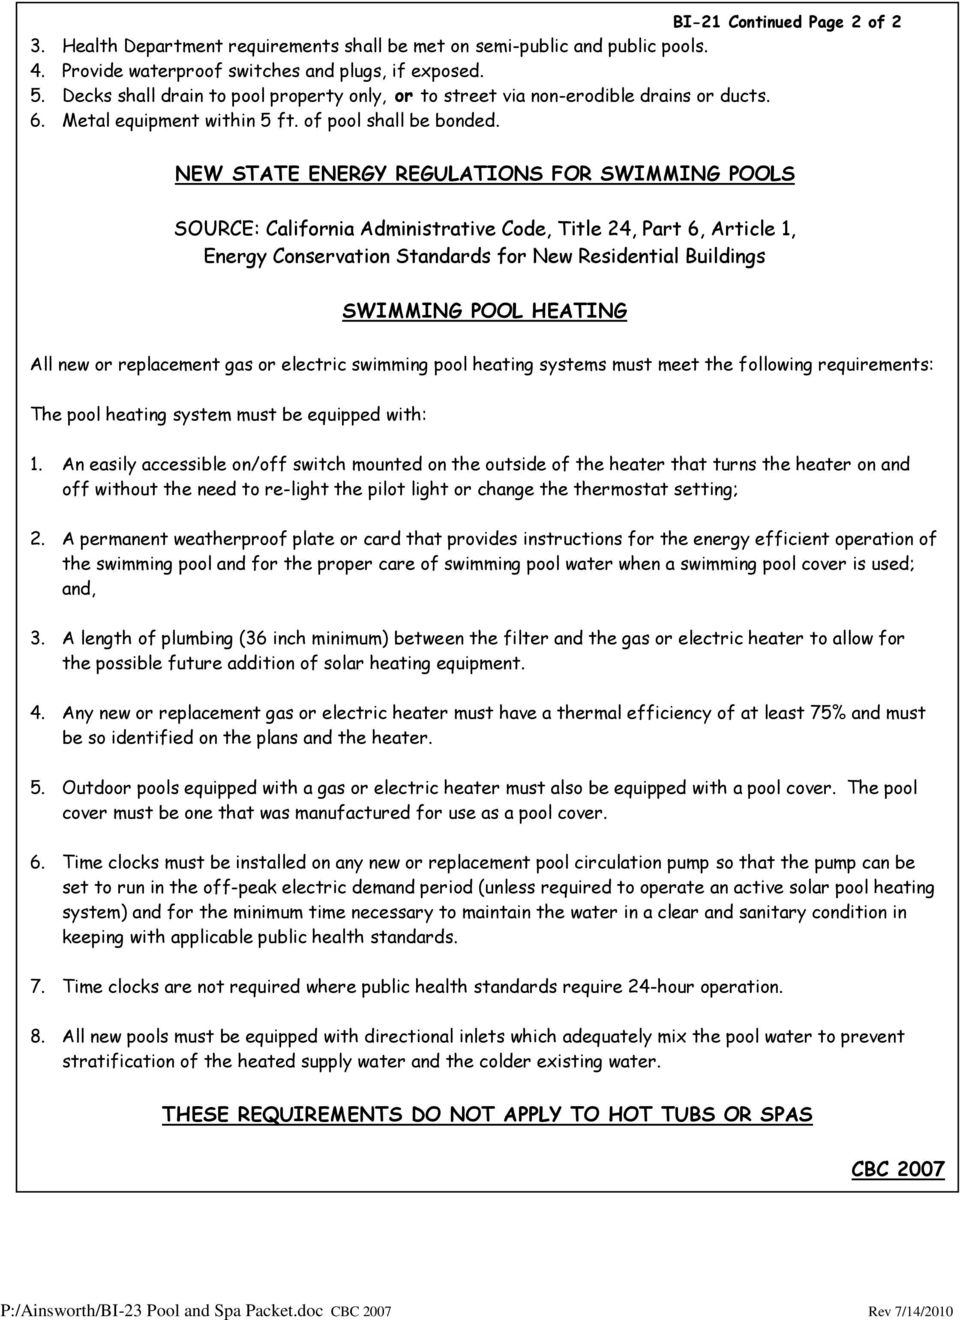 NEW STATE ENERGY REGULATIONS FOR SWIMMING POOLS SOURCE: California Administrative Code, Title 24, Part 6, Article 1, Energy Conservation Standards for New Residential Buildings SWIMMING POOL HEATING